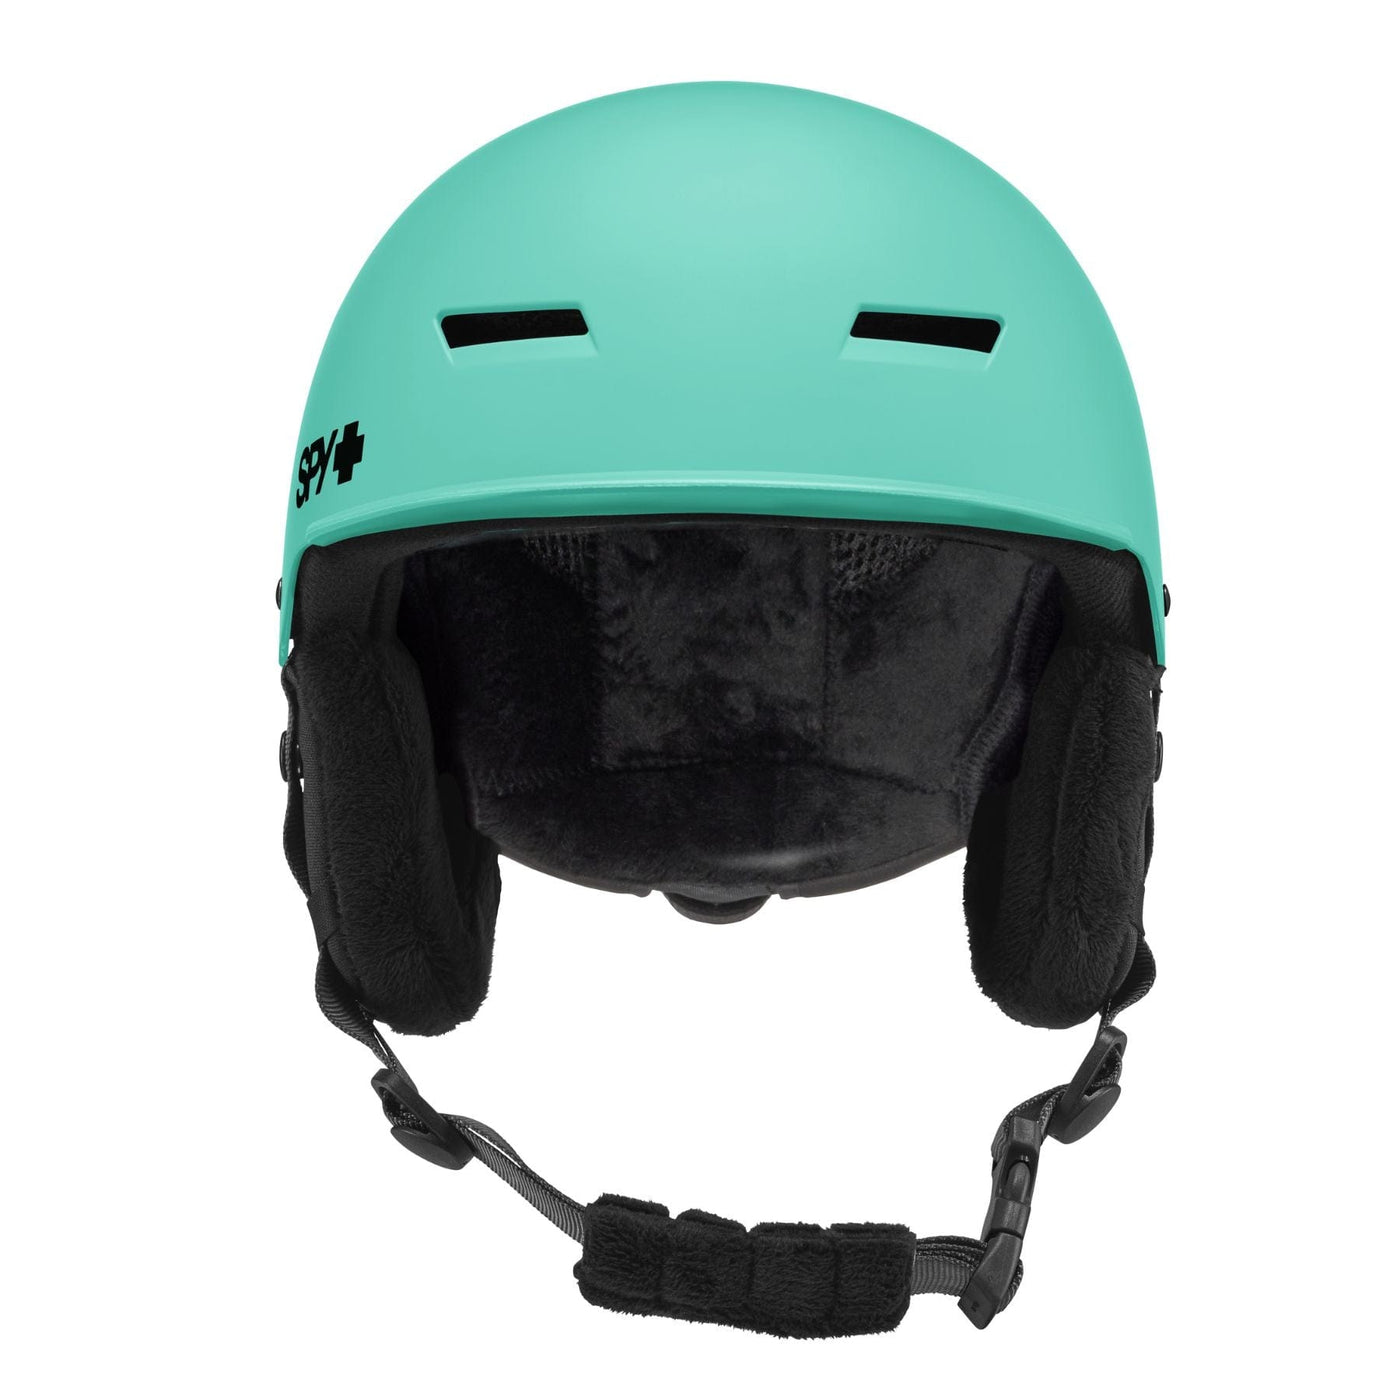 SPY Galactic MIPS Snow Helmet - Neon Teal 8Lines Shop - Fast Shipping